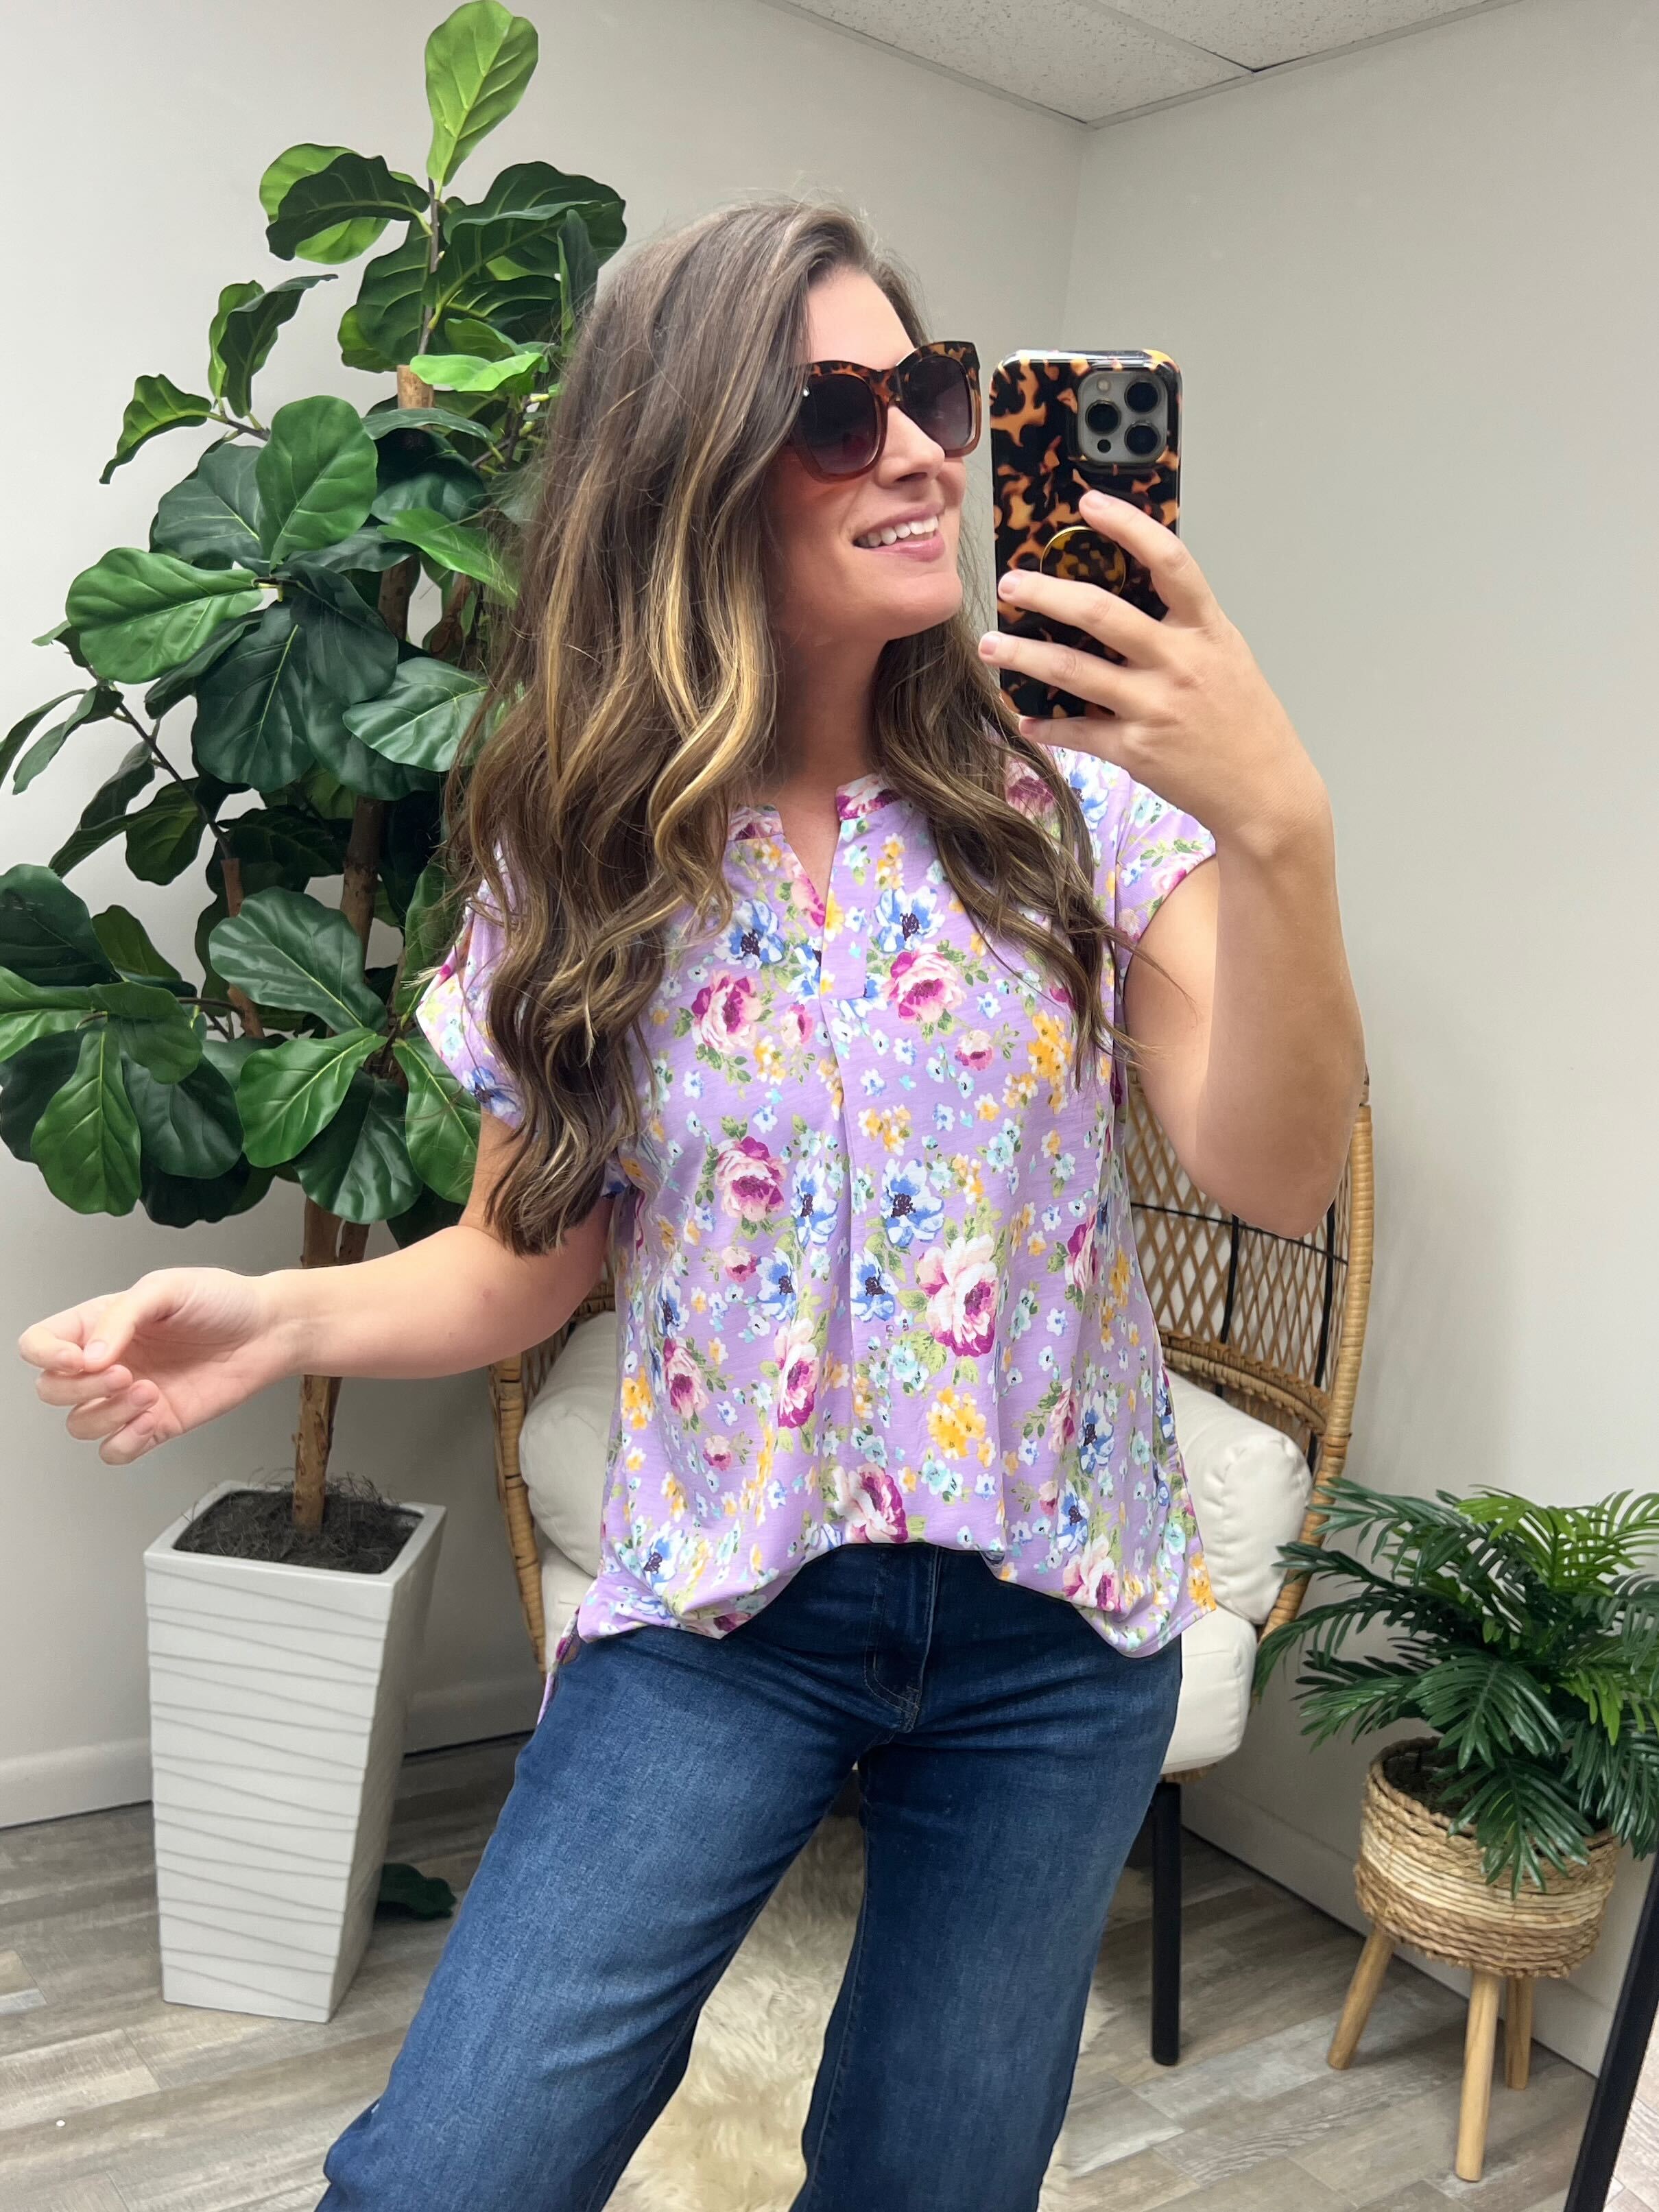 Lizzy Cap Sleeve Top in Lavender and Magenta Floral